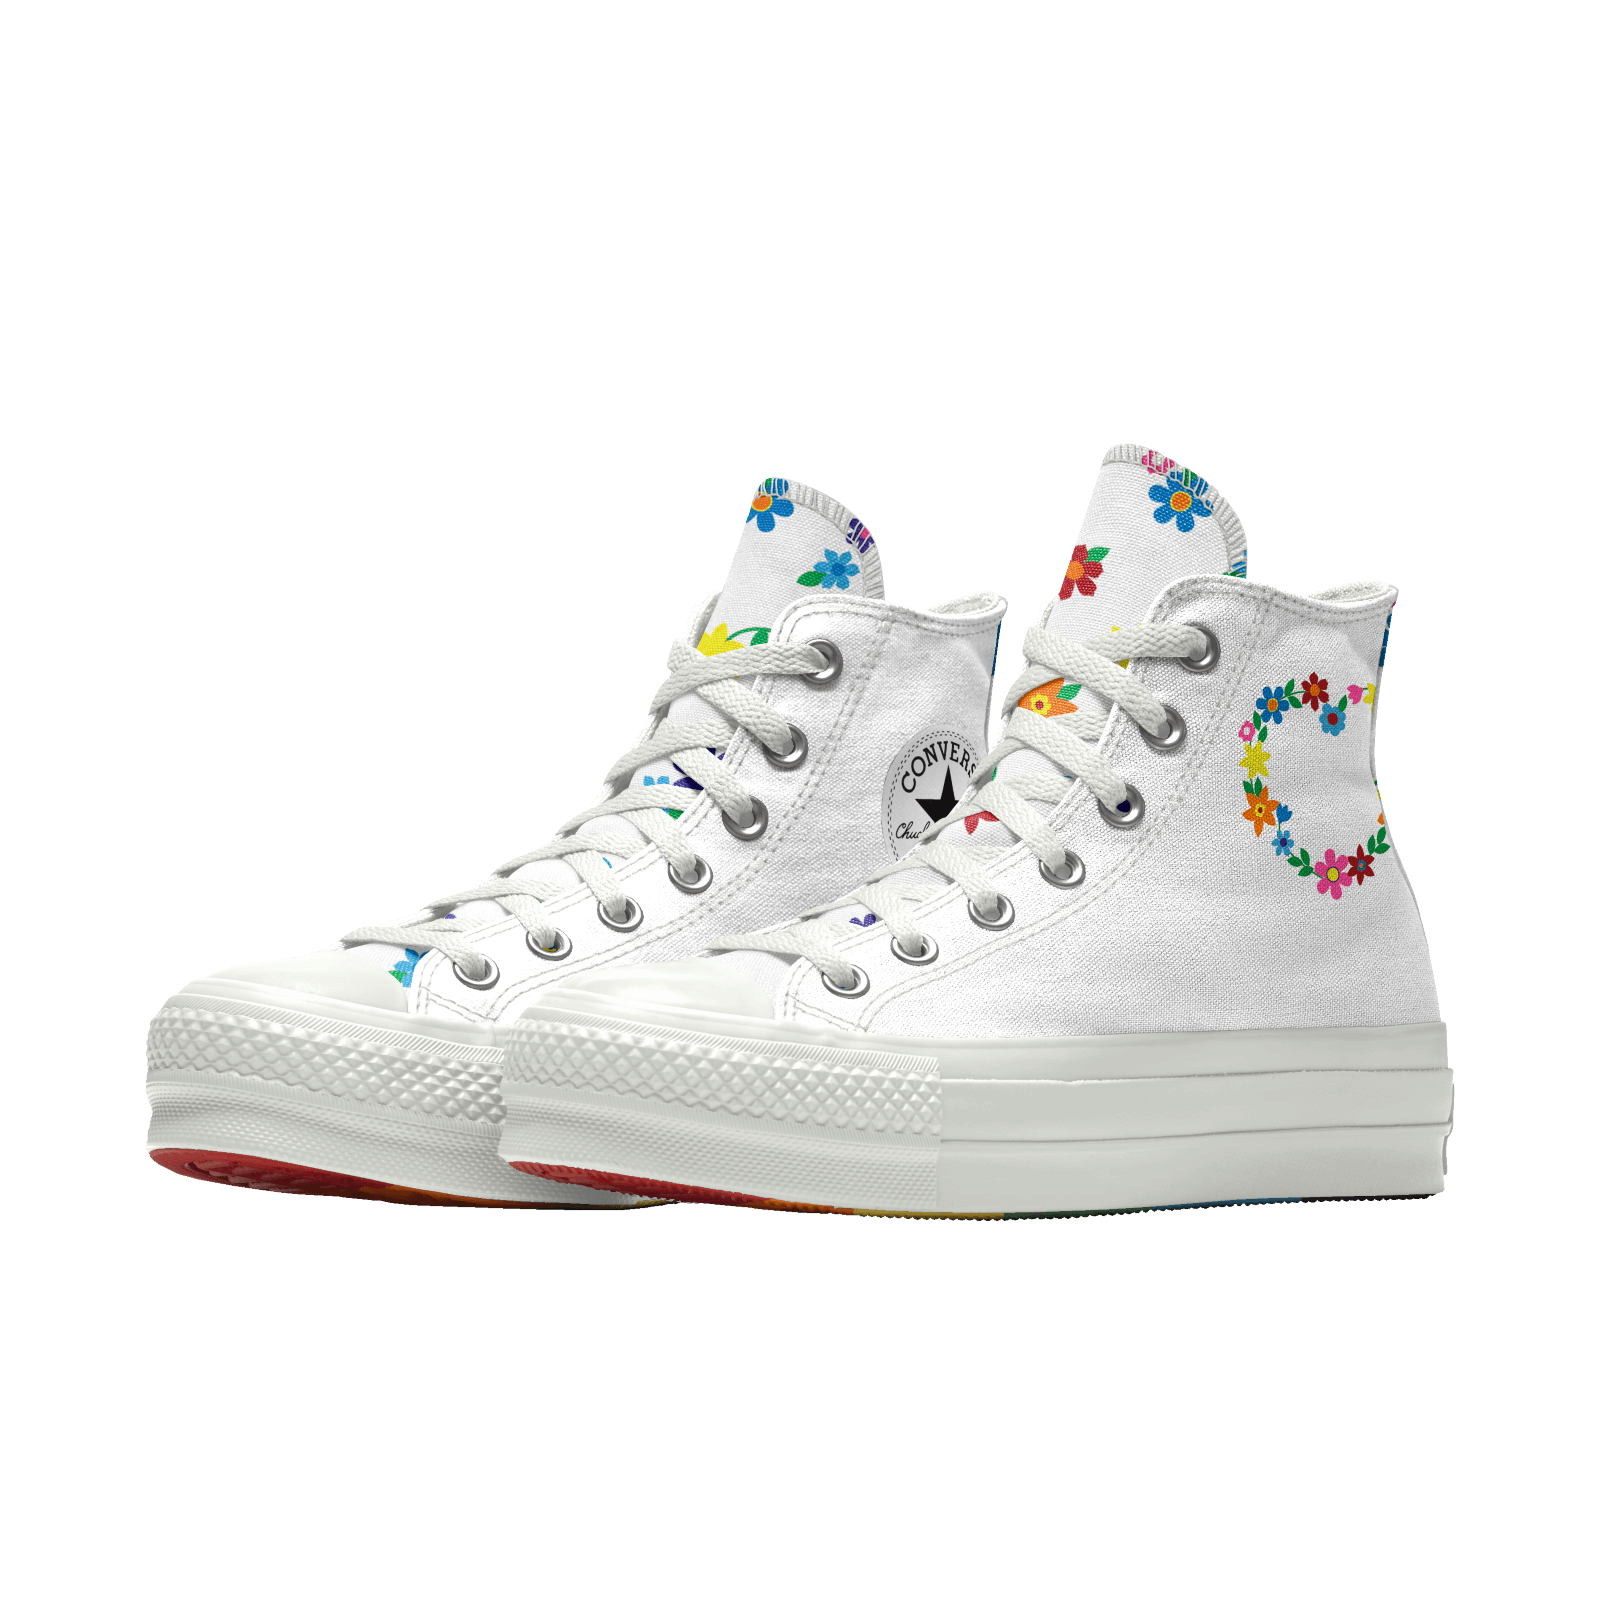 CNK-Converse-Pride-2021-Collection-Tereza-All-Star-Platoform-High-shoe.png